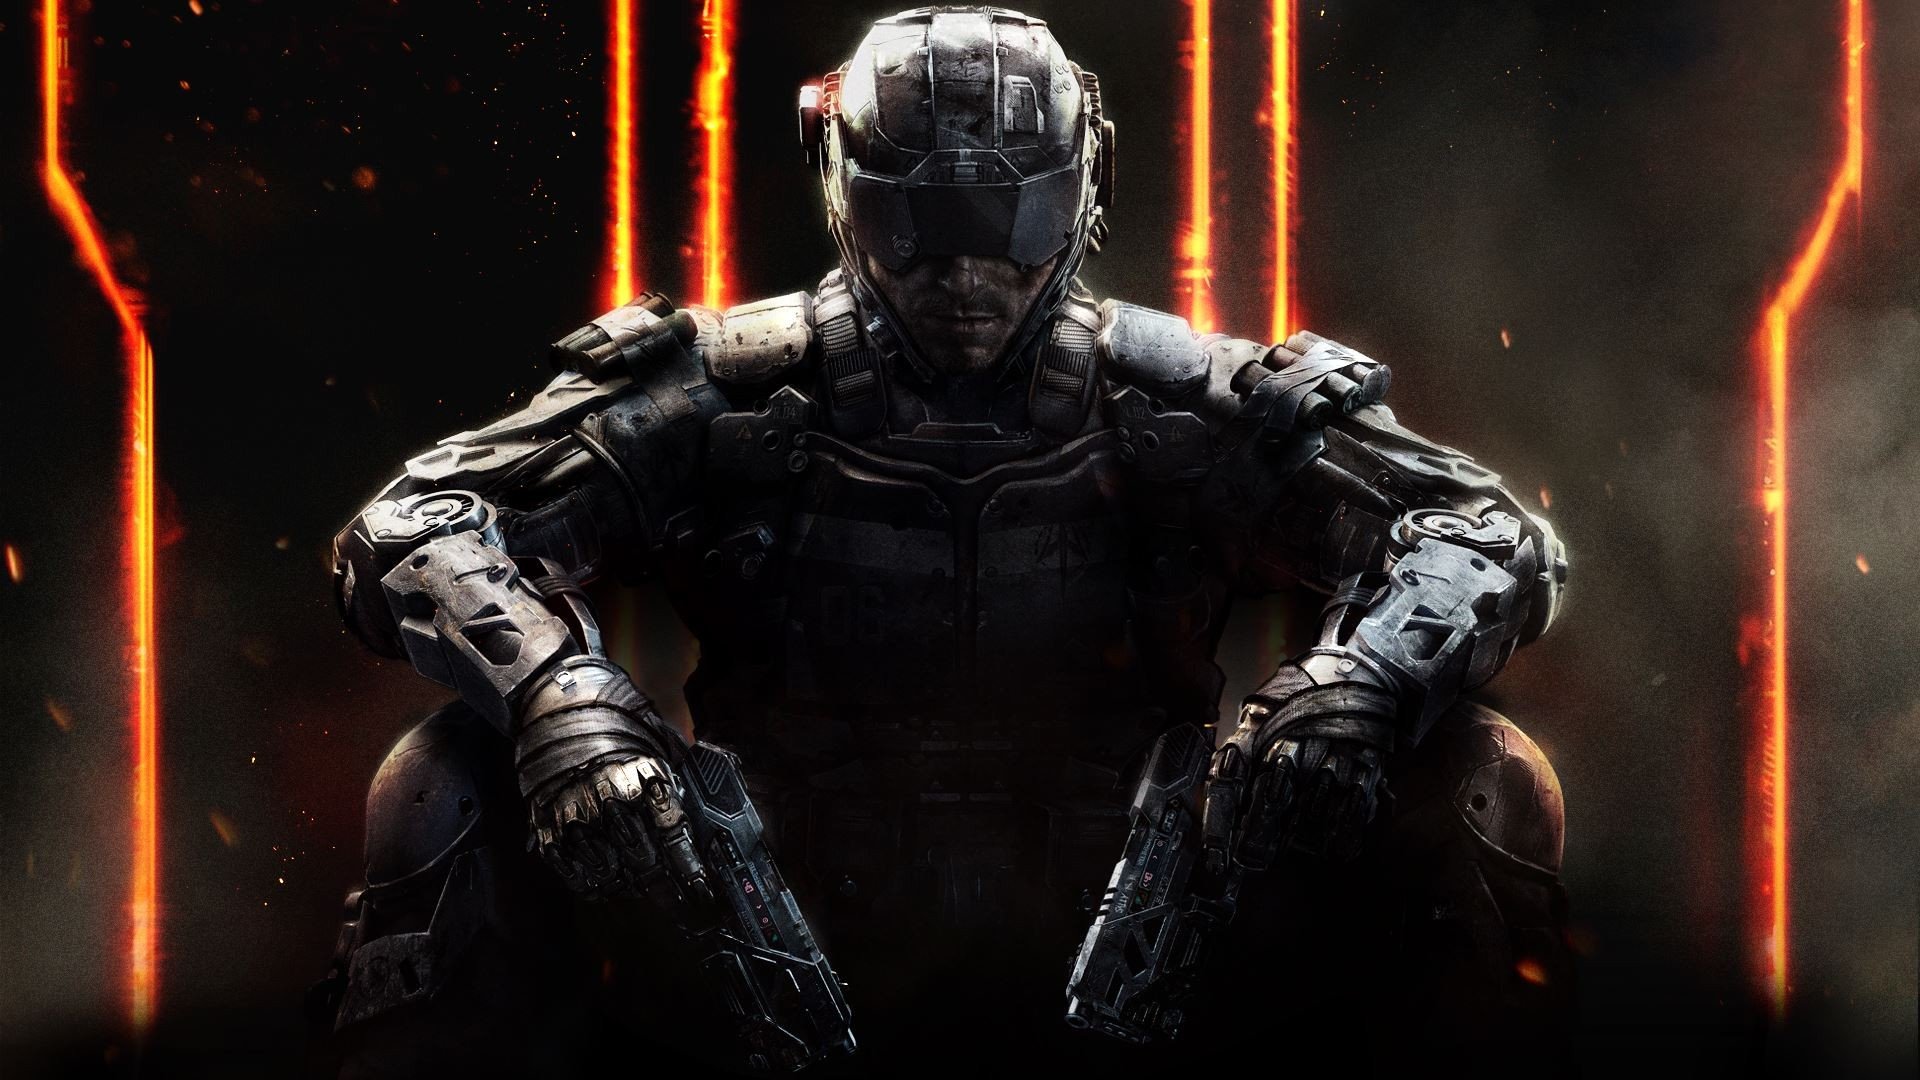 Call of Duty: Black Ops III, Call of Duty, Video games Wallpaper